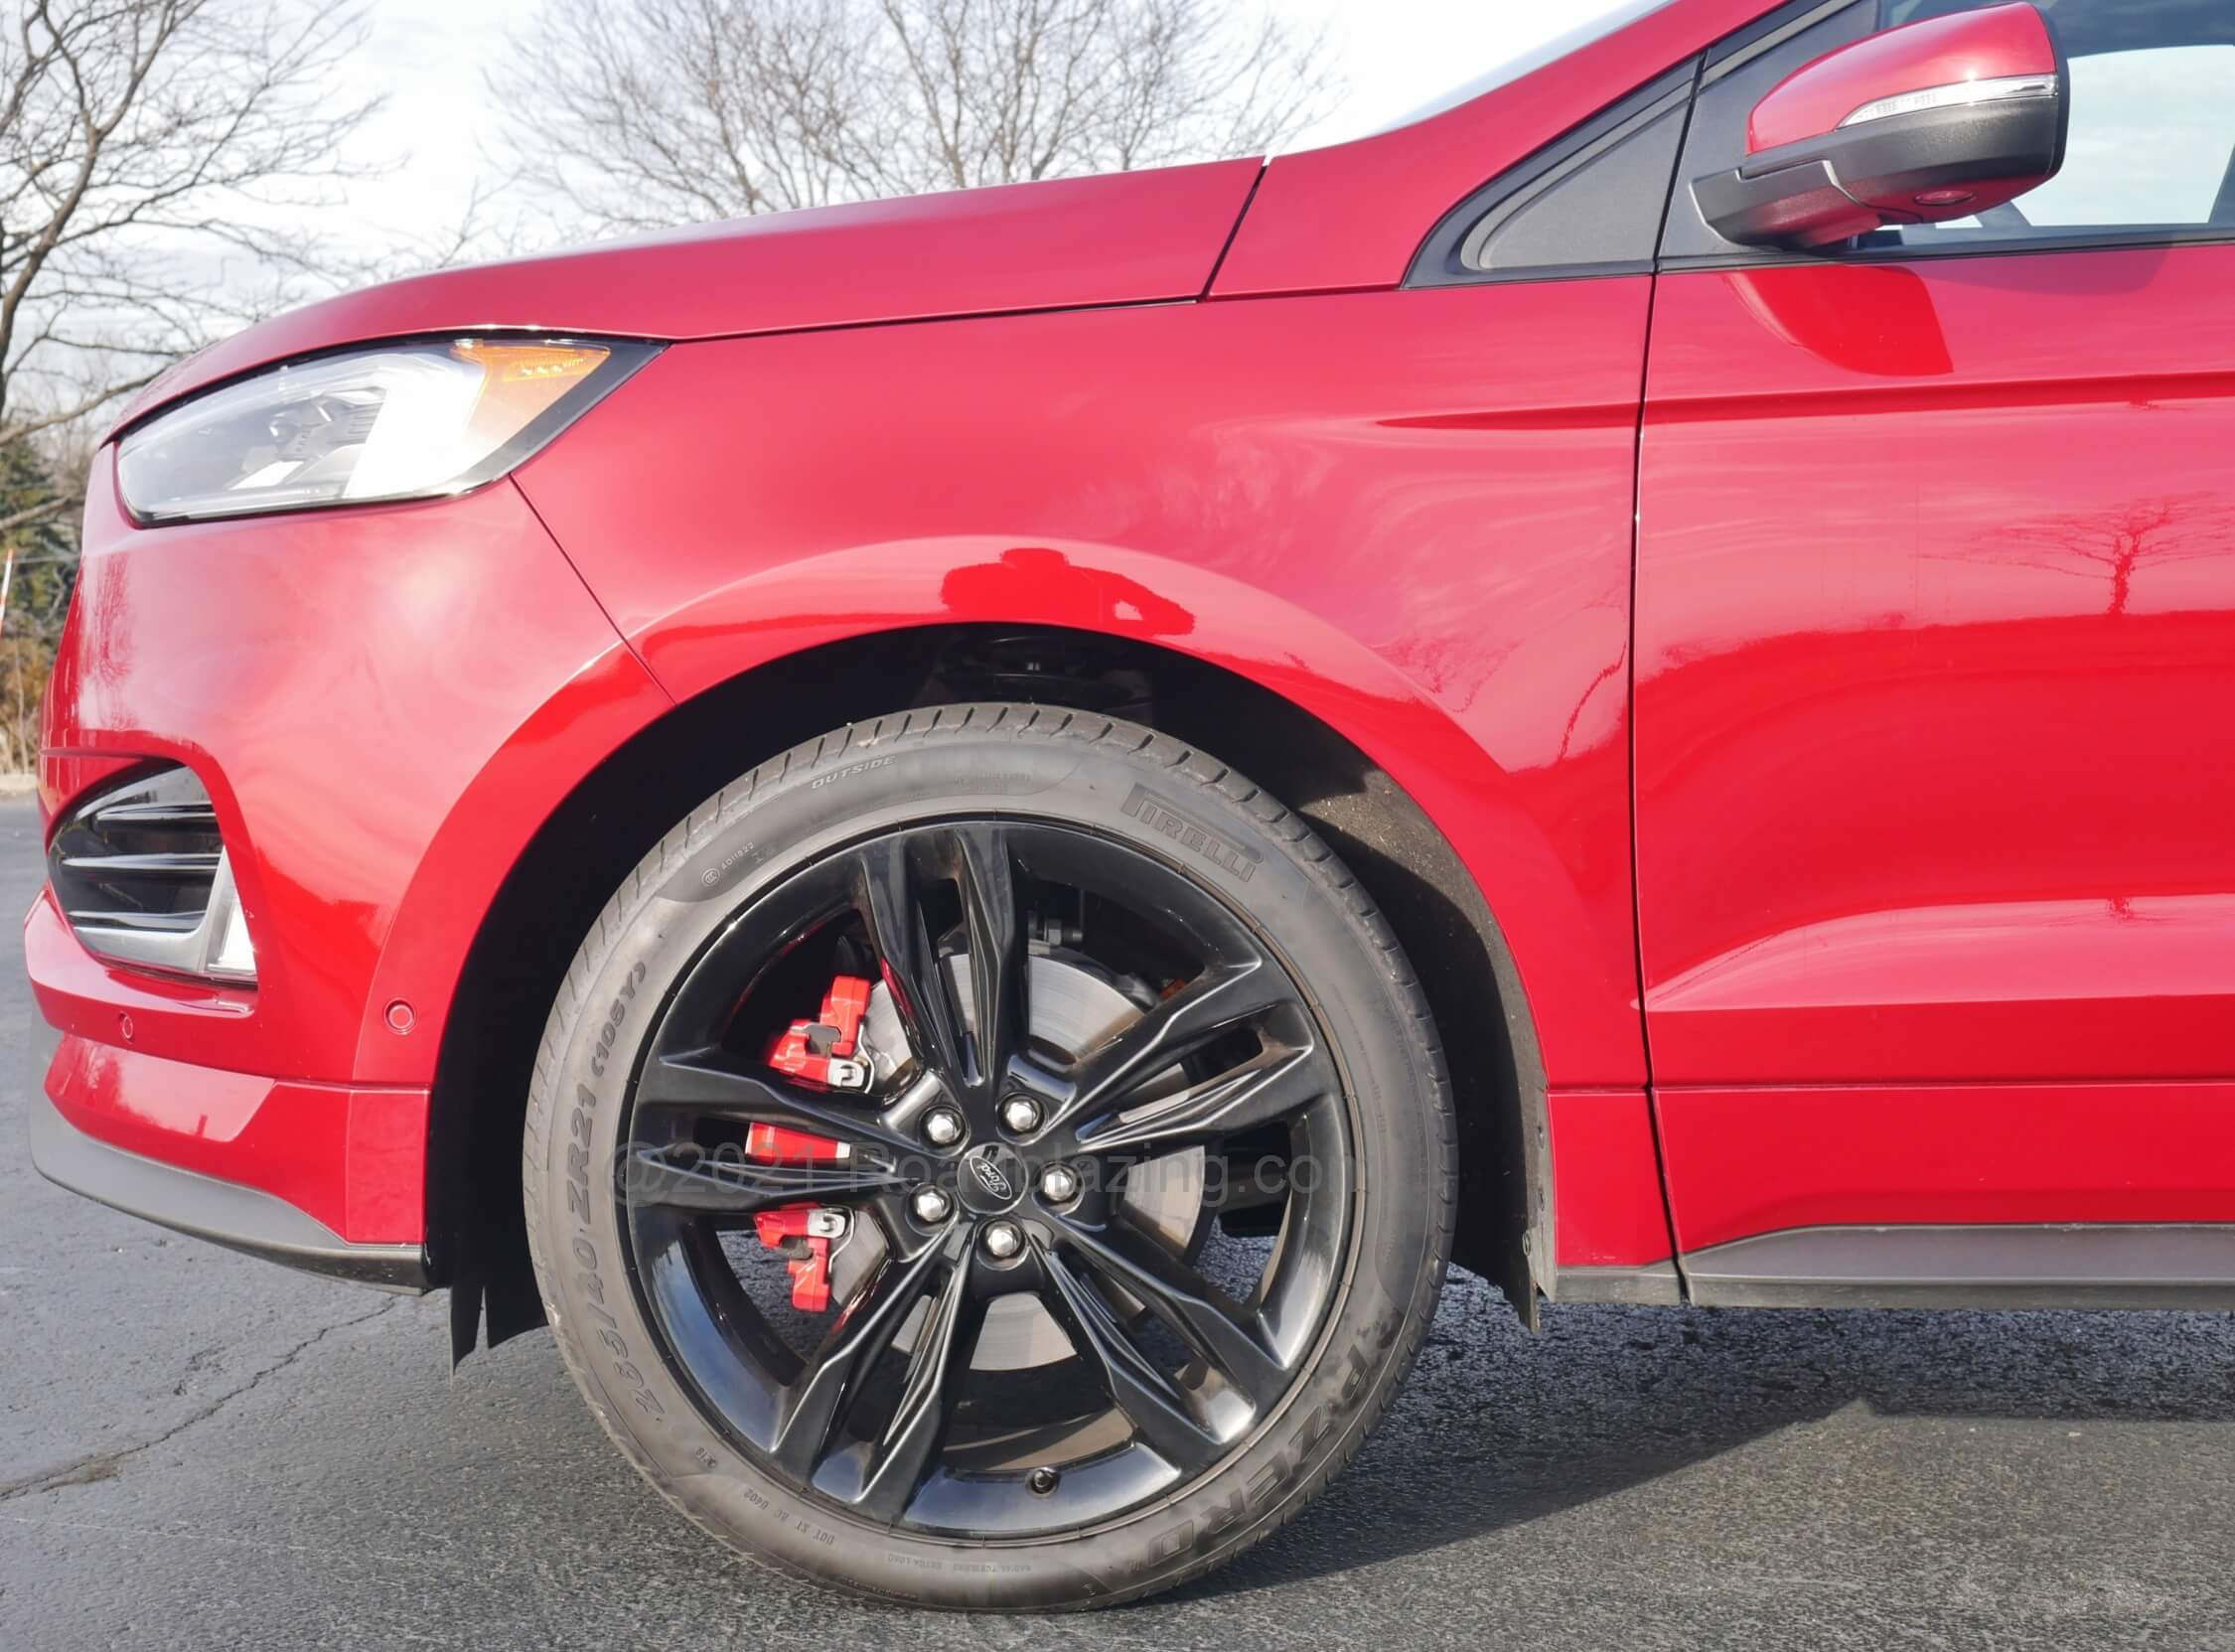 2020 Ford Edge ST: Massive 21" wheels bounded in 265/40 summer performance rubber compromise compliance. Hefty steering is rapid and turn in sharp despite top heaviness